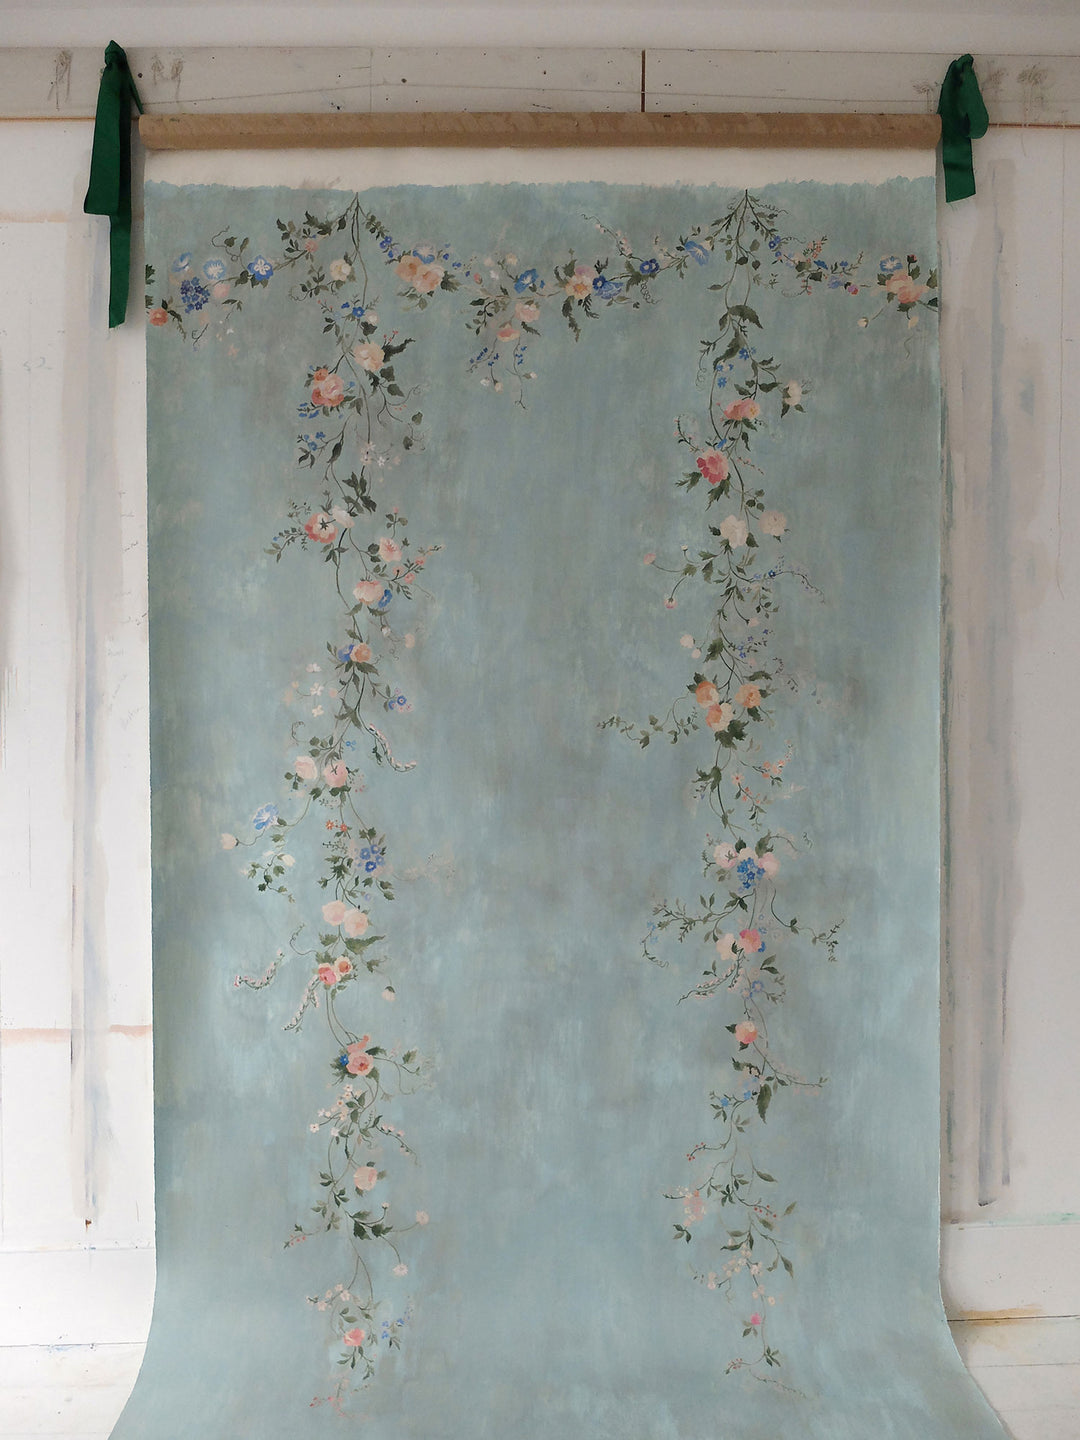 Floral-Roberts-Hamilton-Weston-wallpaper-trailing-flowers-Garland-hand-illustrated-panel-walls-mural-floral-Garland-painterly-pale-turquoise-01